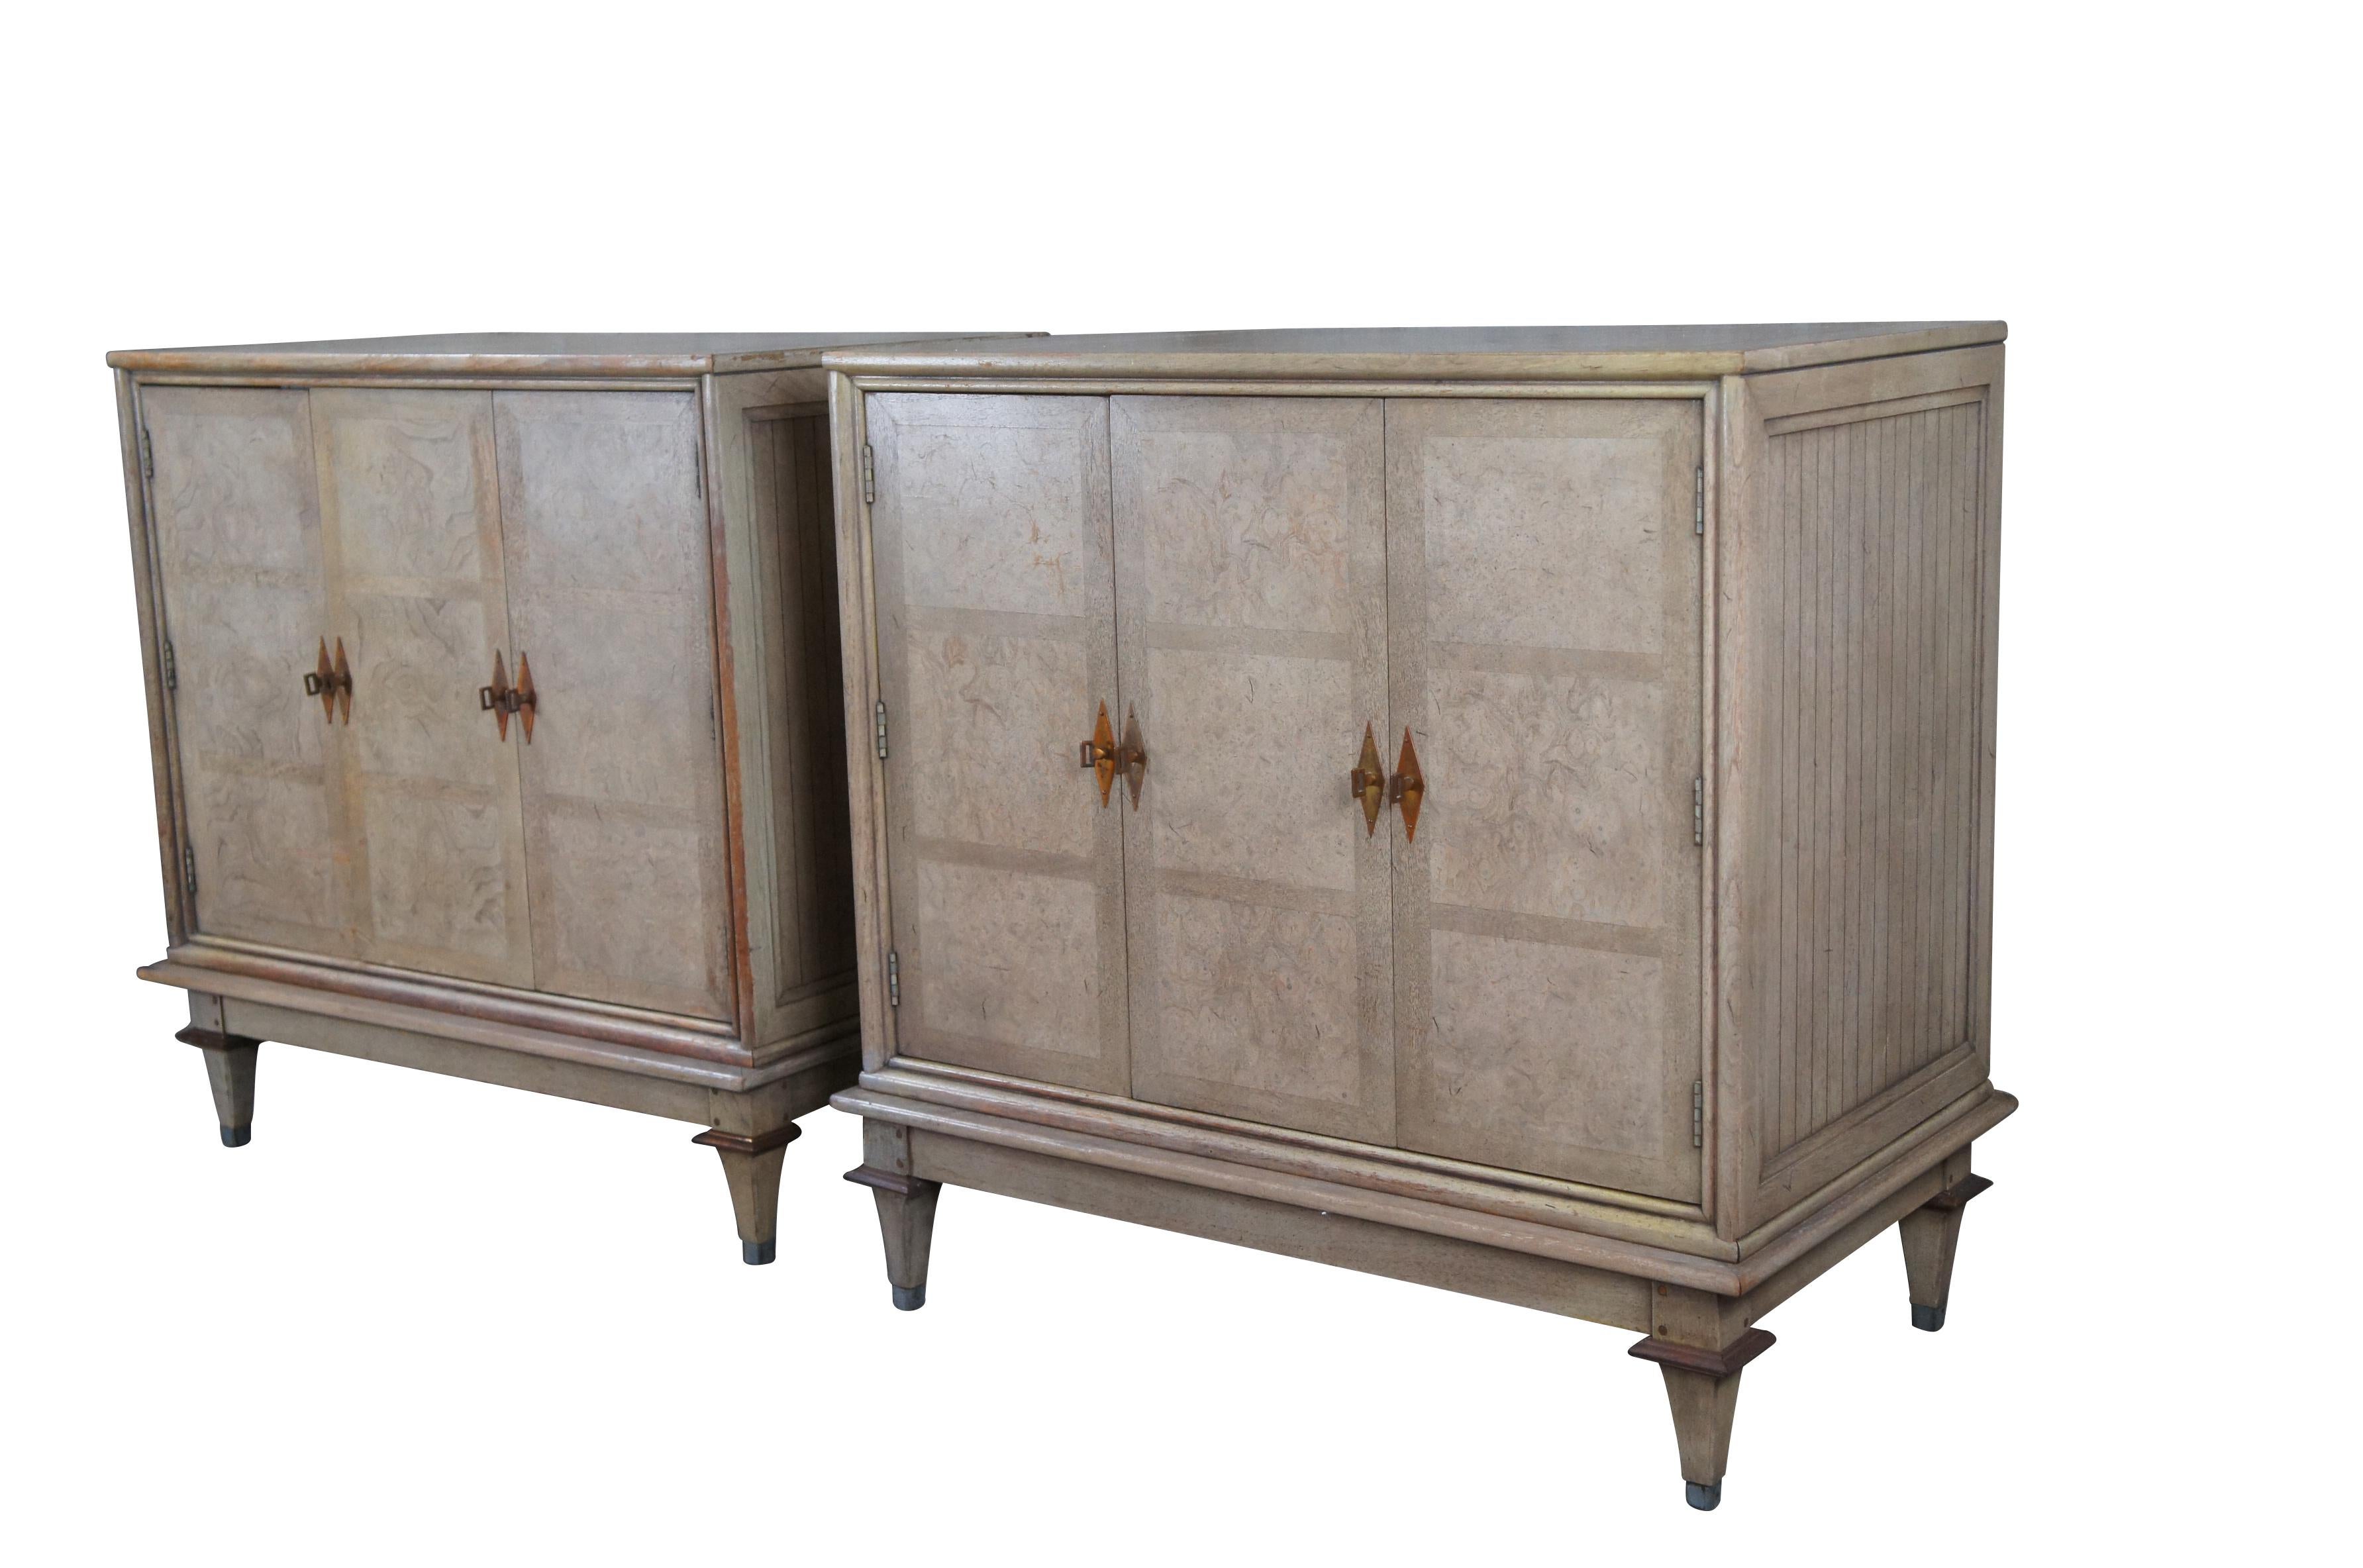 Pair of mid century modern buffets / credenzas / sideboards / servers / nightstands by Bernhard Rohne for Mastercraft Furniture Company.  Made from ash burl featuring modular form with paneled sides, folding doors, dovetailed drawers and silverware